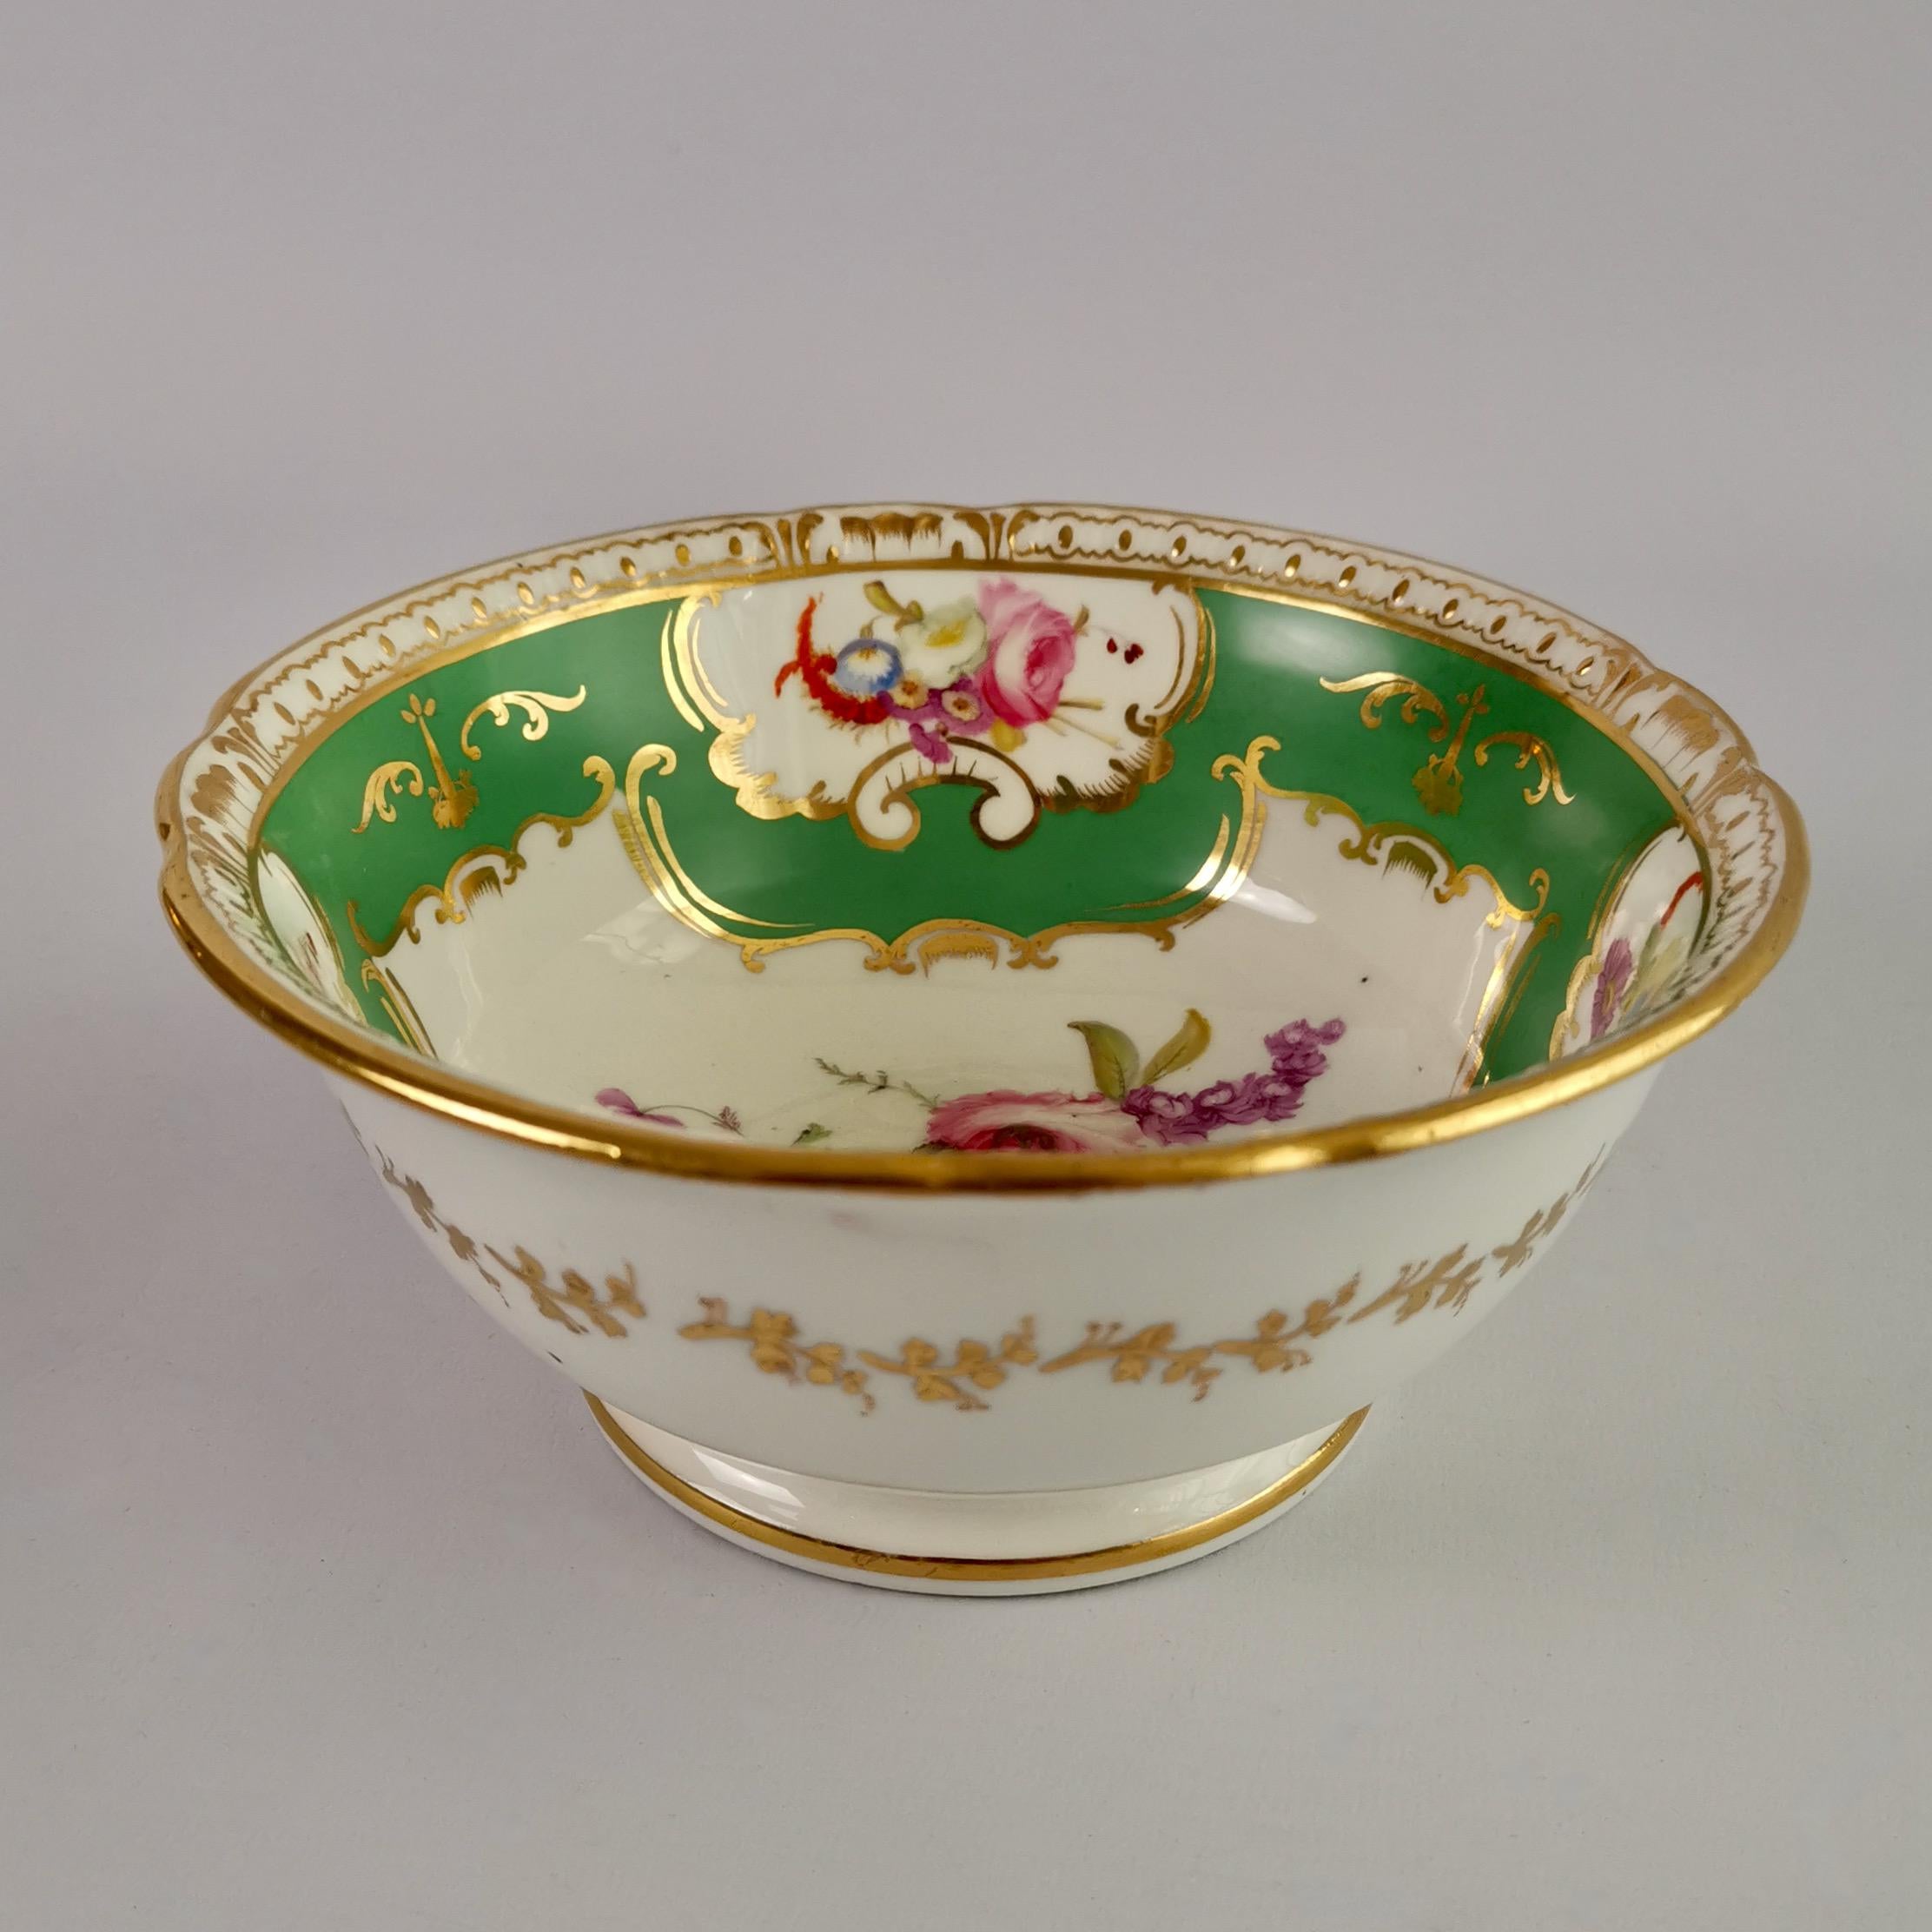 This is a beautiful slop bowl made by Coalport circa 1826, which was the late Regency era. The bowl has a bright green ground color with hand painted flower reserves and nice gilded moulding on the rim.

Coalport was one of the leading potters in